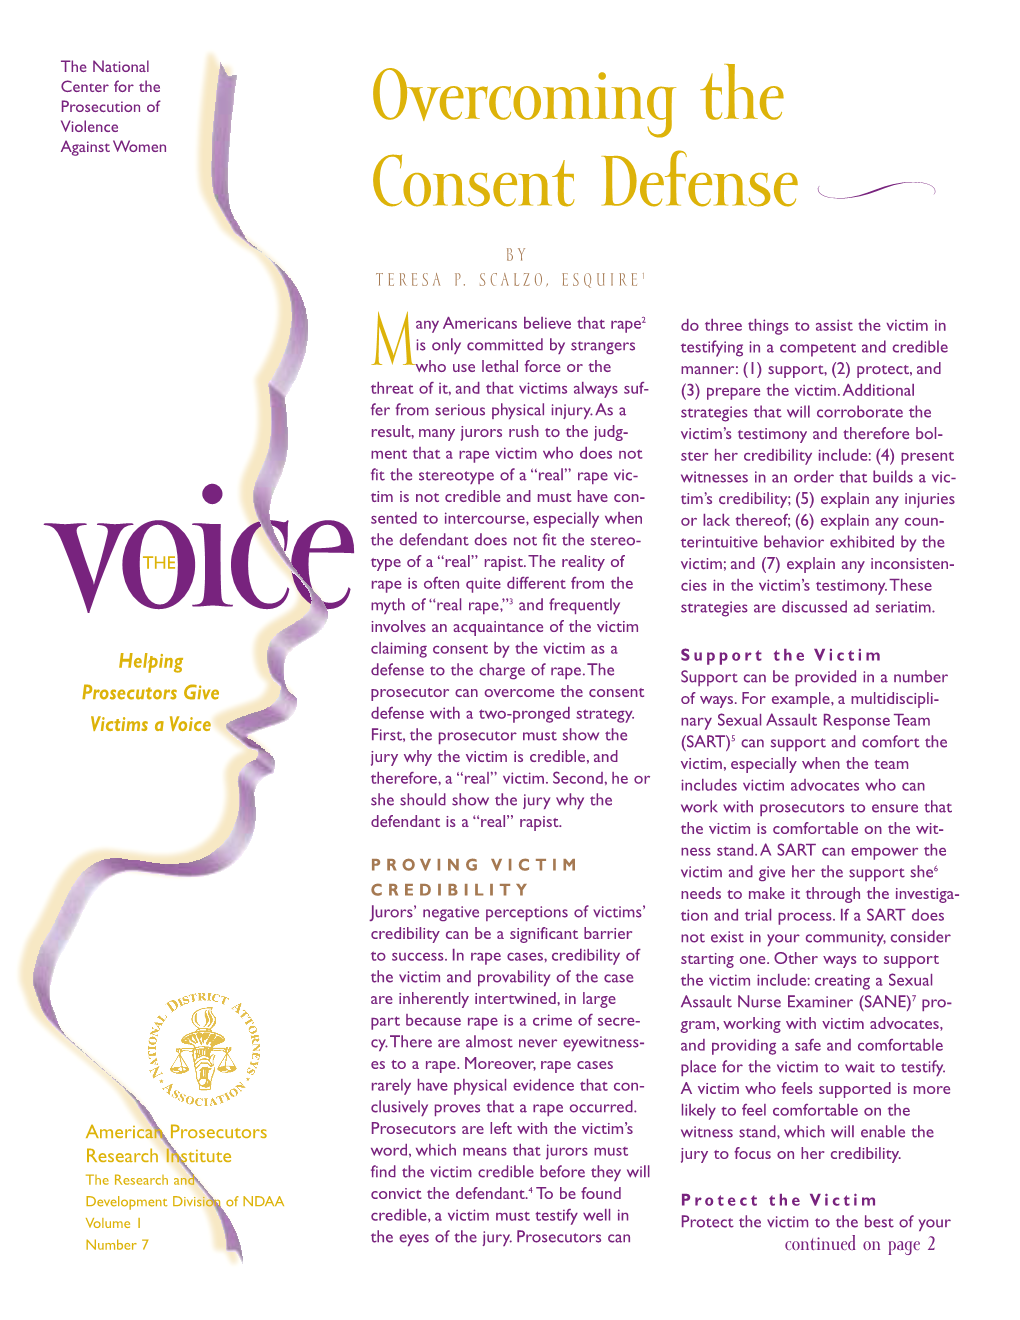 Overcoming the Consent Defense Is Come the Victim’S Resistance